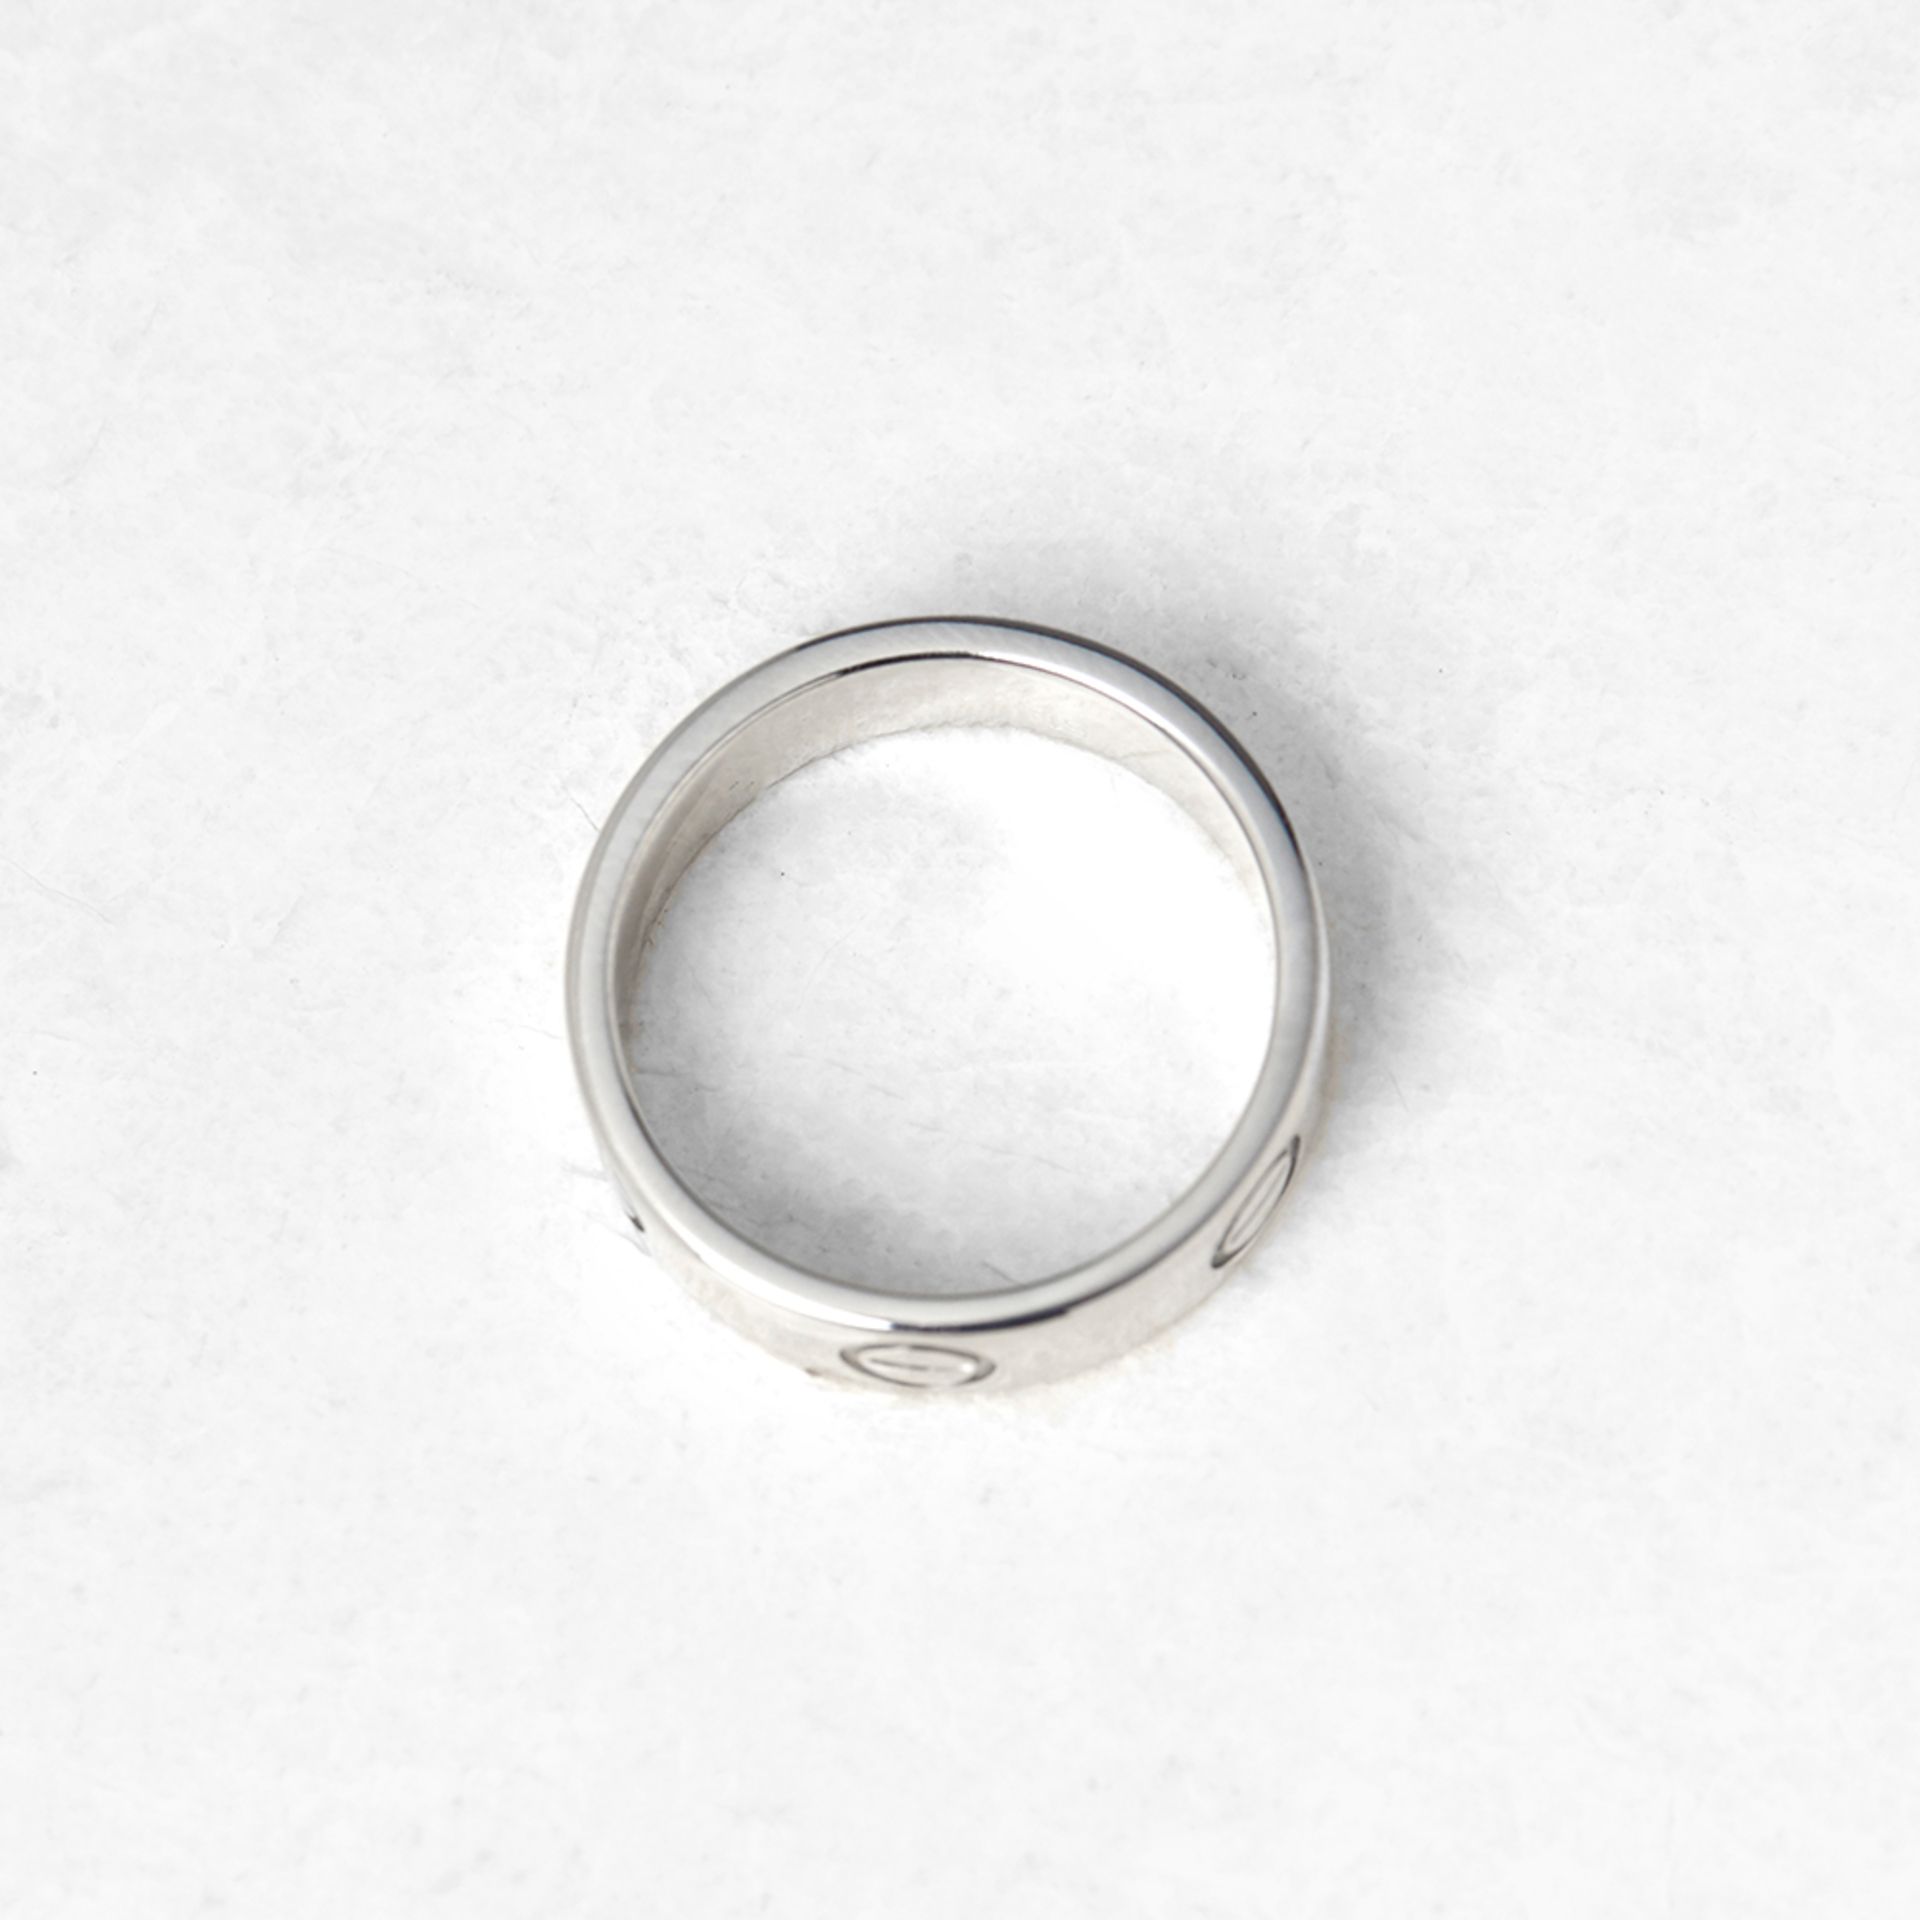 Cartier 18k White Gold Love Ring - Image 5 of 6